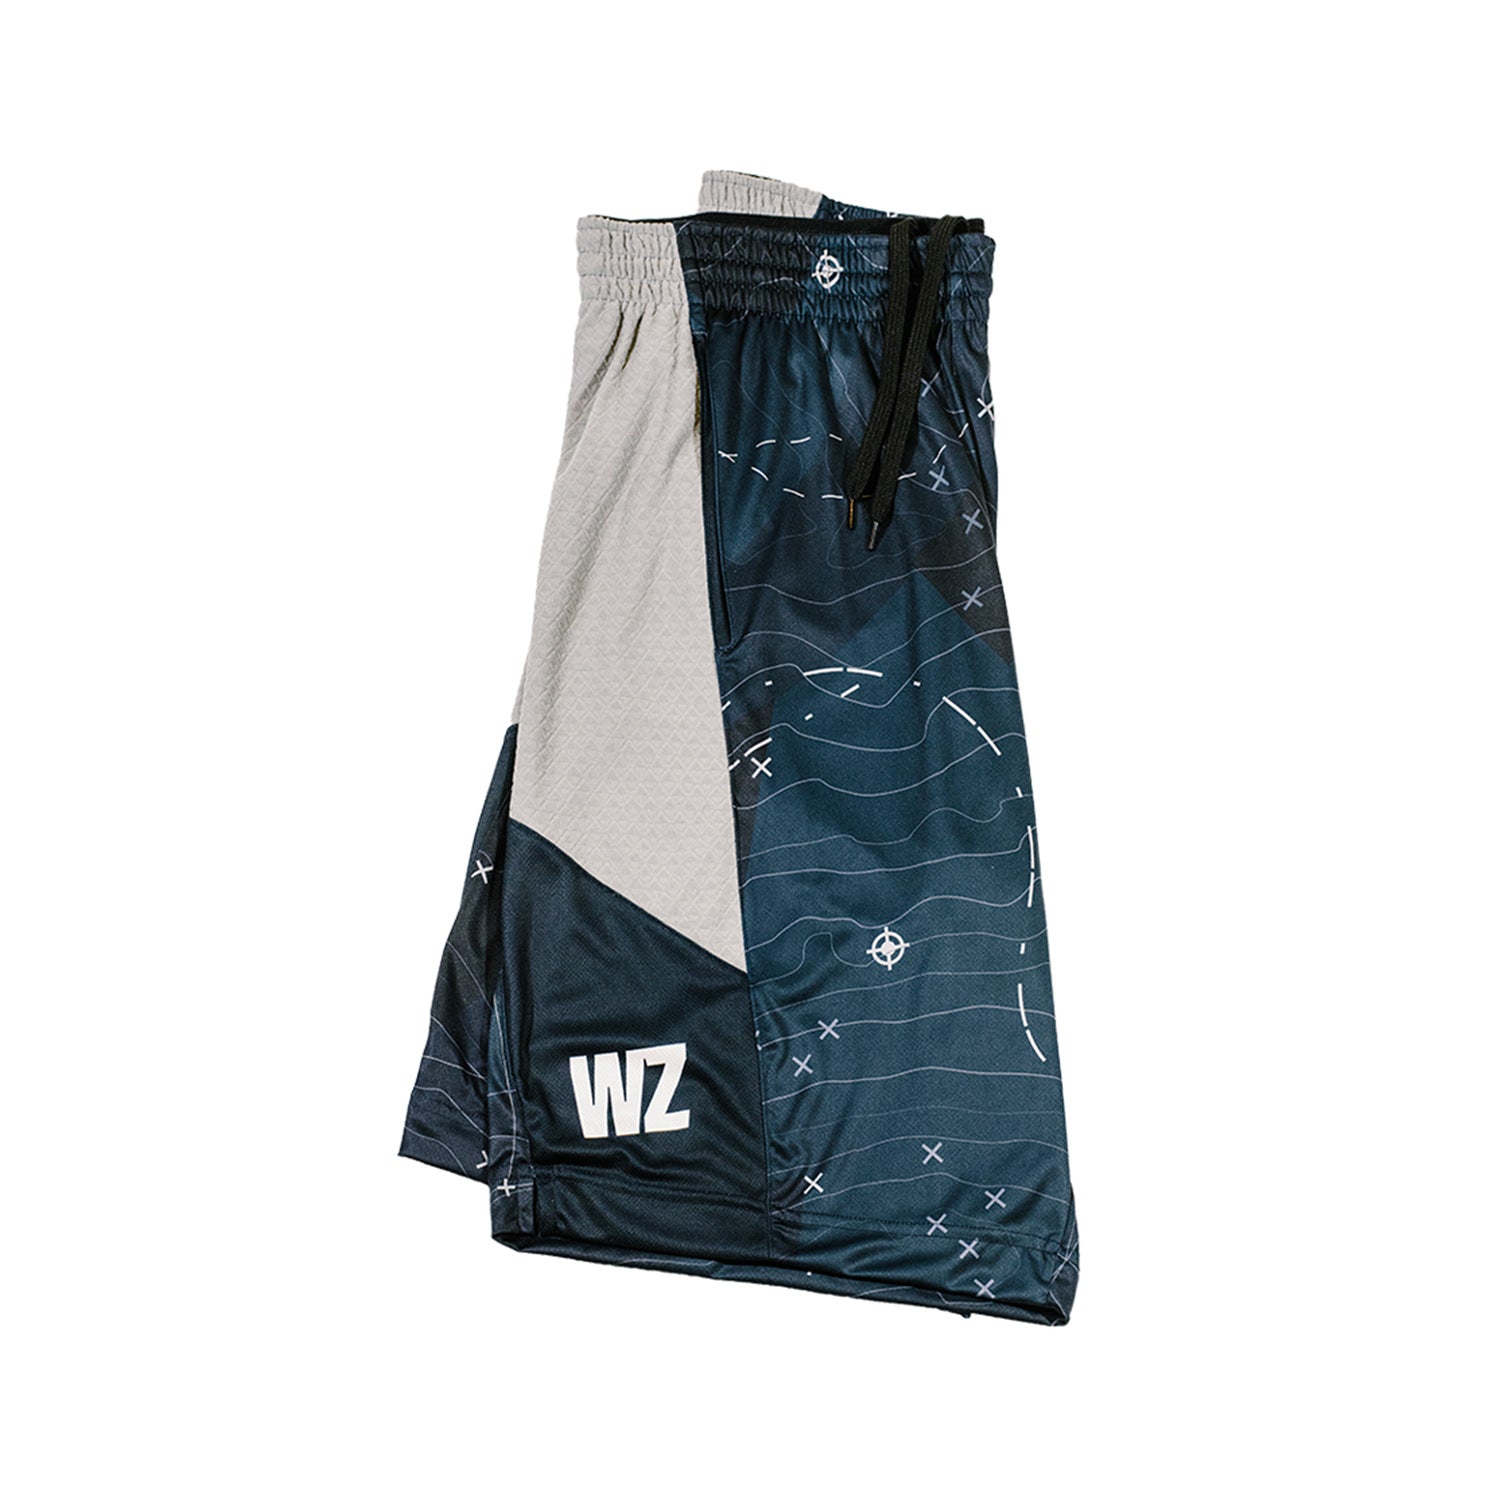 Call of Duty Point3 Blue Topographic Shorts - Folded View